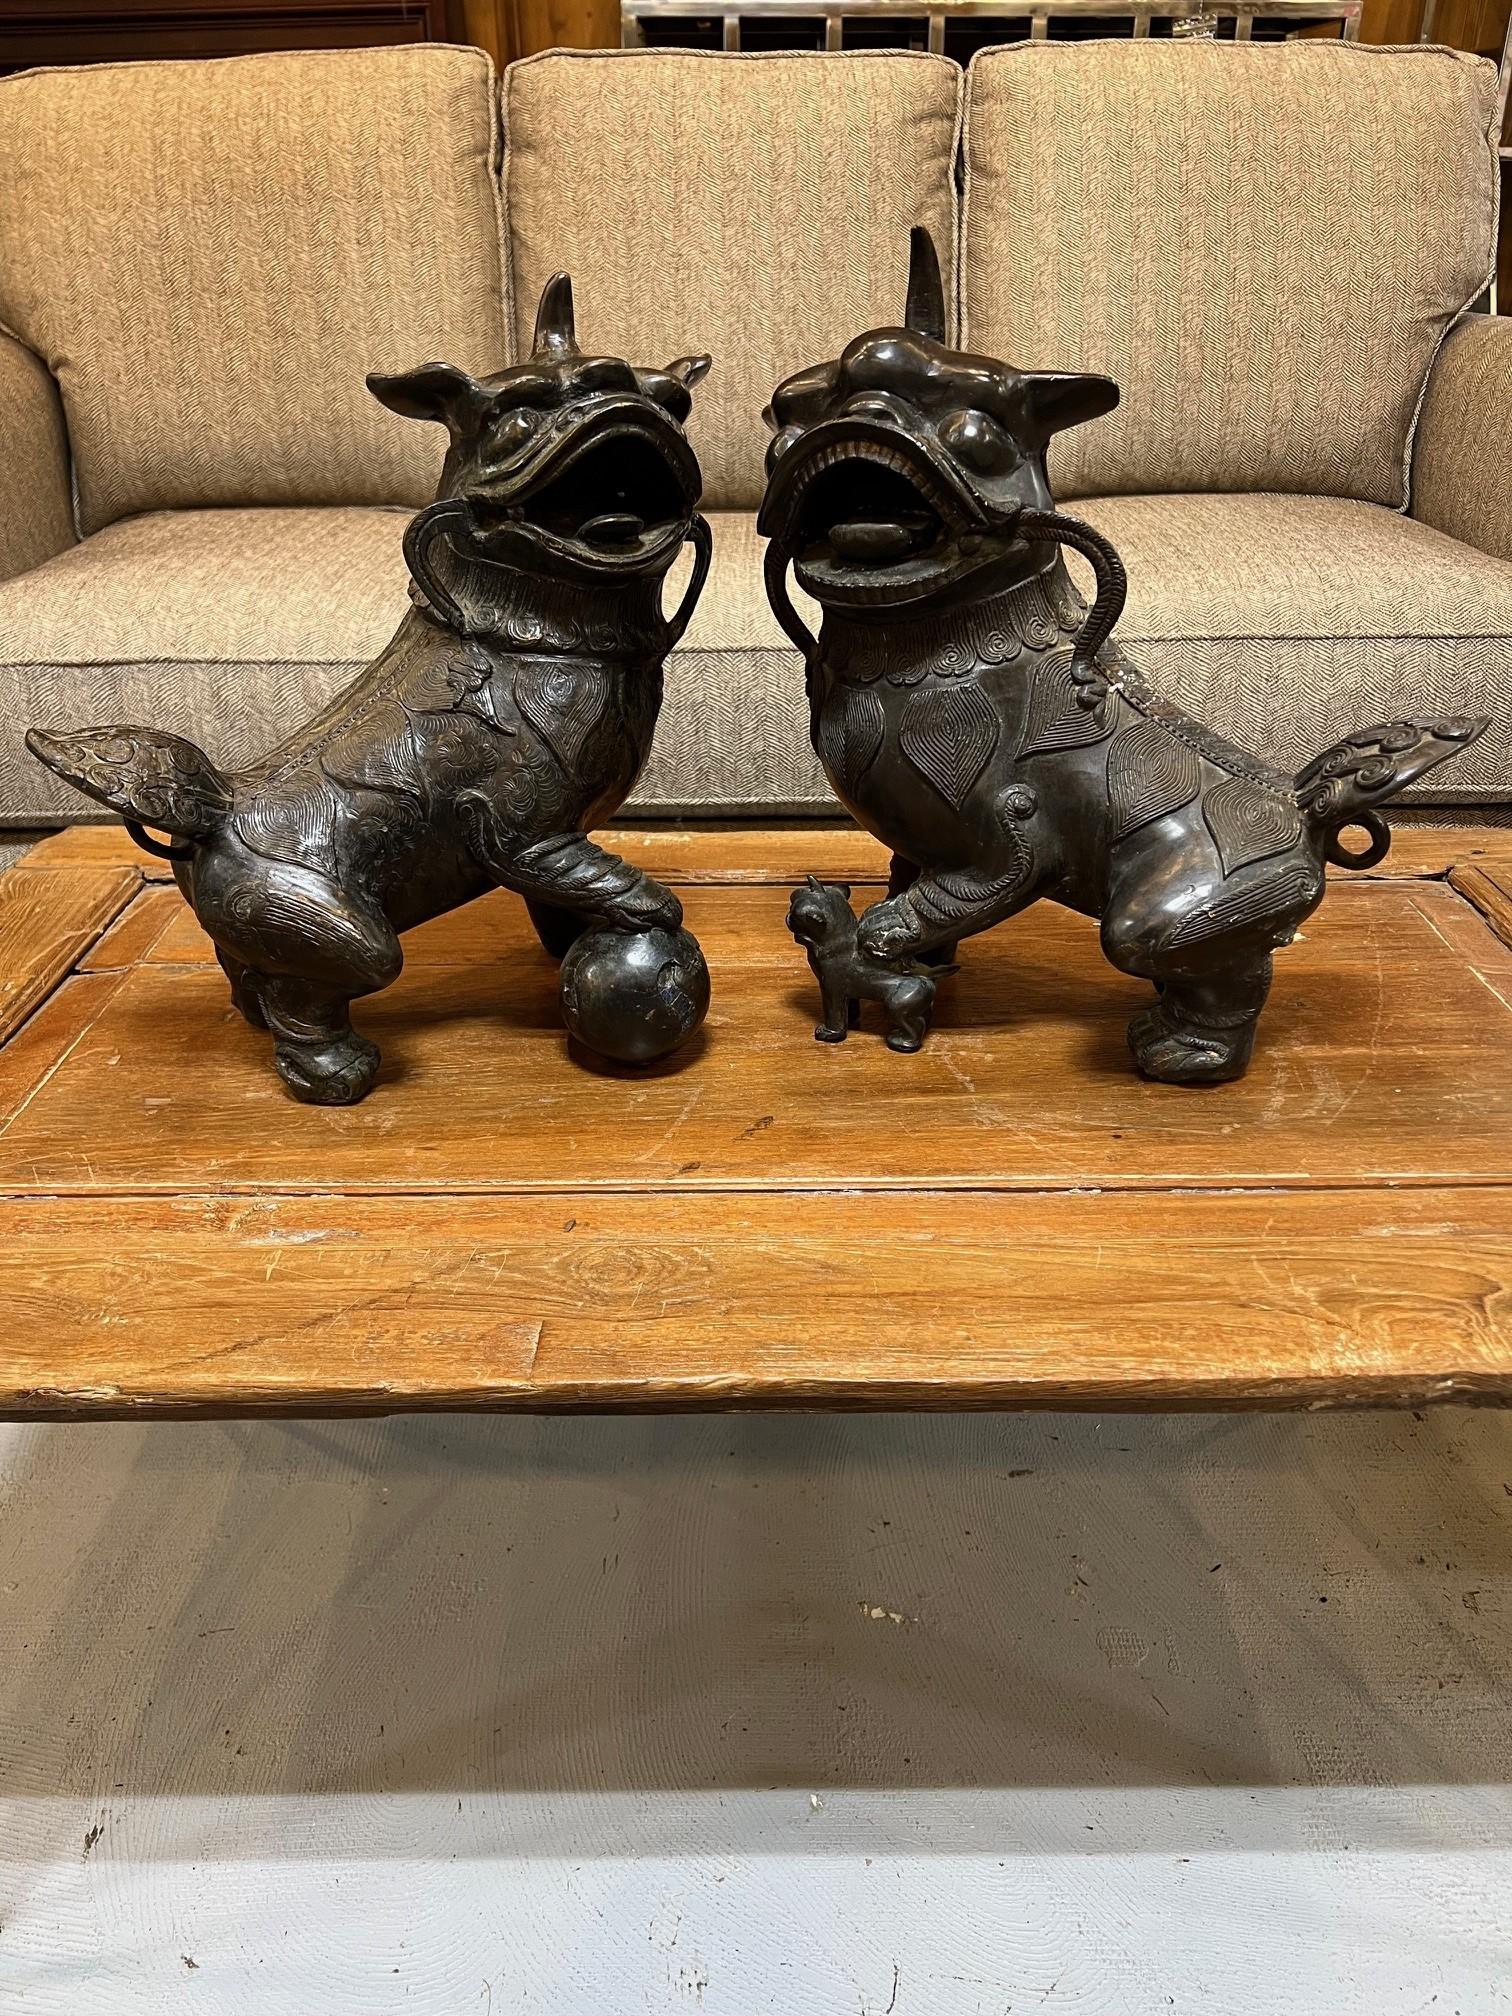 This is a nice pair of bronze Foo Dogs with a male and female with baby. They would look great in a garden or entrance to your home or garden. Foo Dogs also known as Guardian Lions symbolize prosperity, success, and guardianship, placed at the